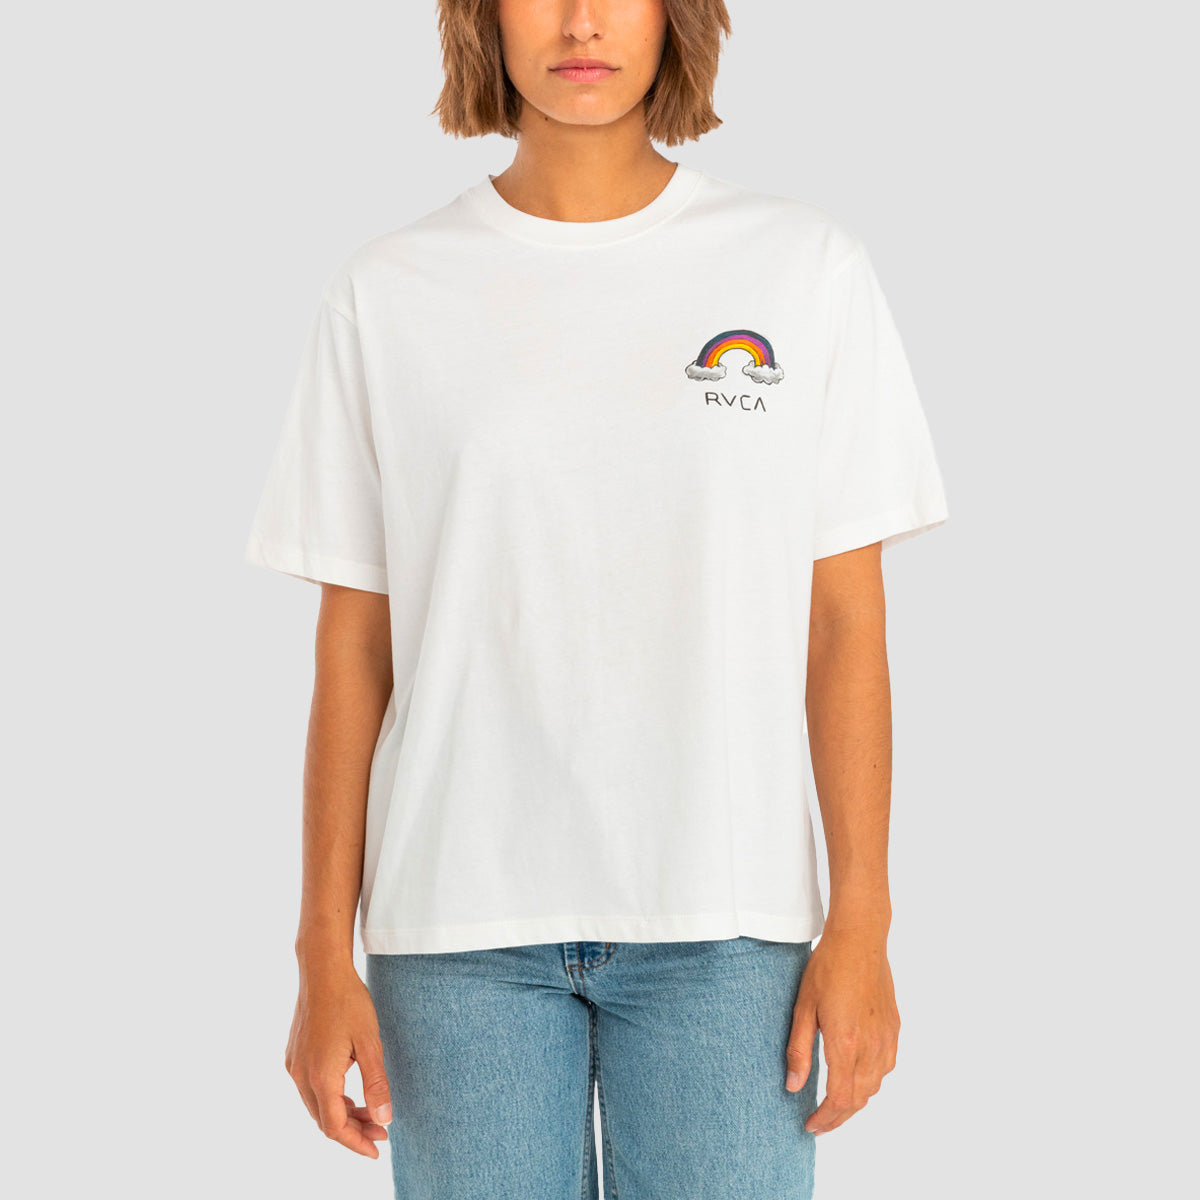 RVCA Andrew Pommier Rainbow Connection T-Shirt Vintage White - Womens